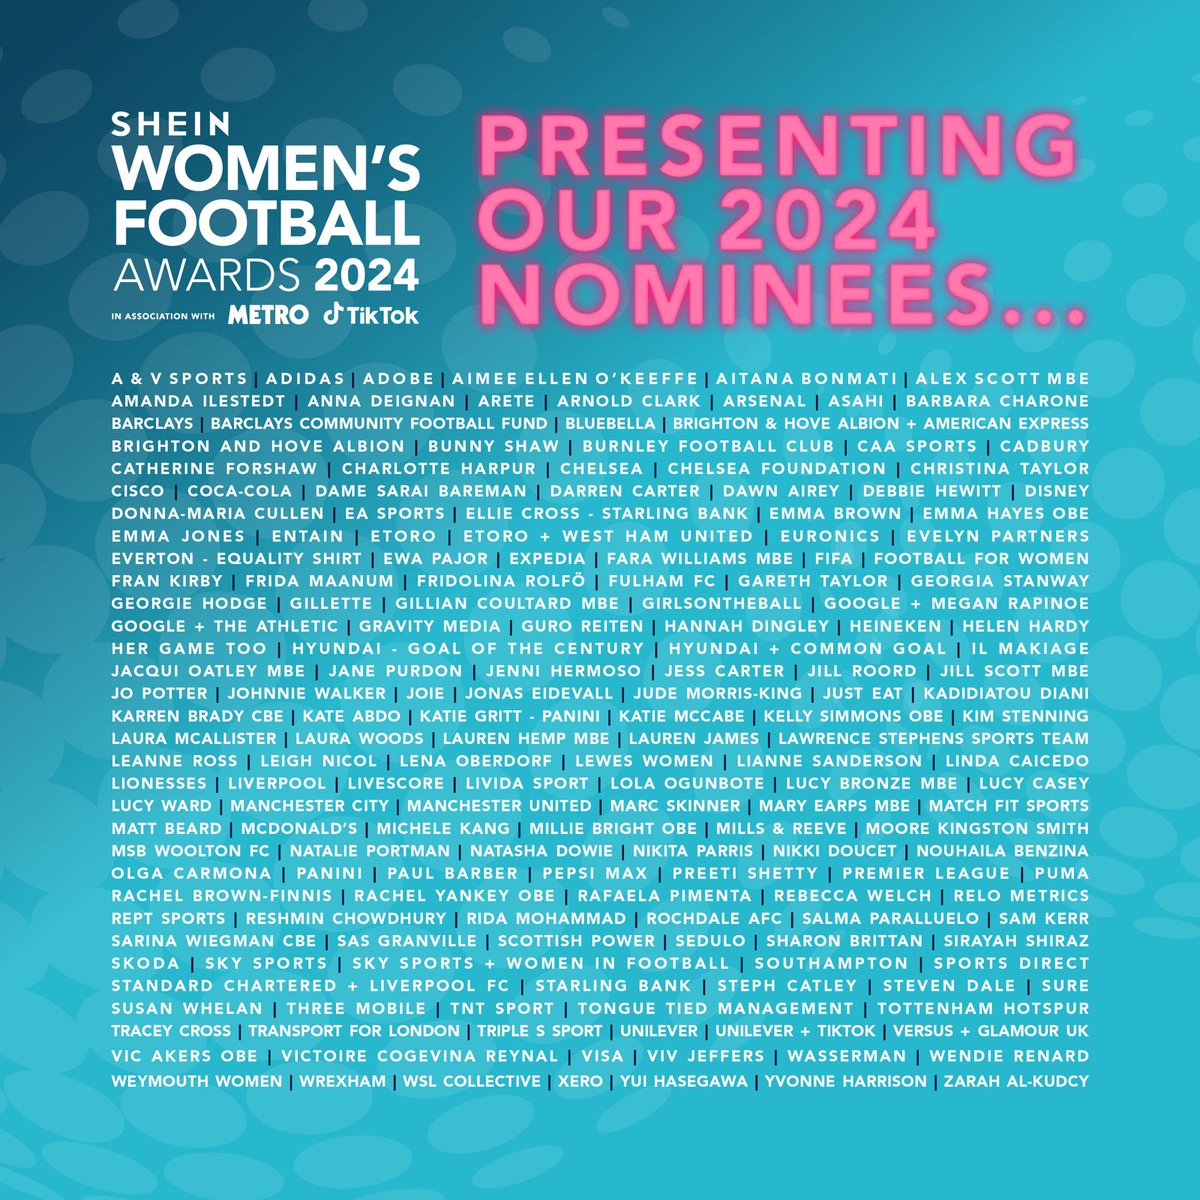 There's just 1 month left until the 2024 Women's Football Awards! Get ready to celebrate our incredible nominees. ⚽️✨ #WomensFootball #WFA24